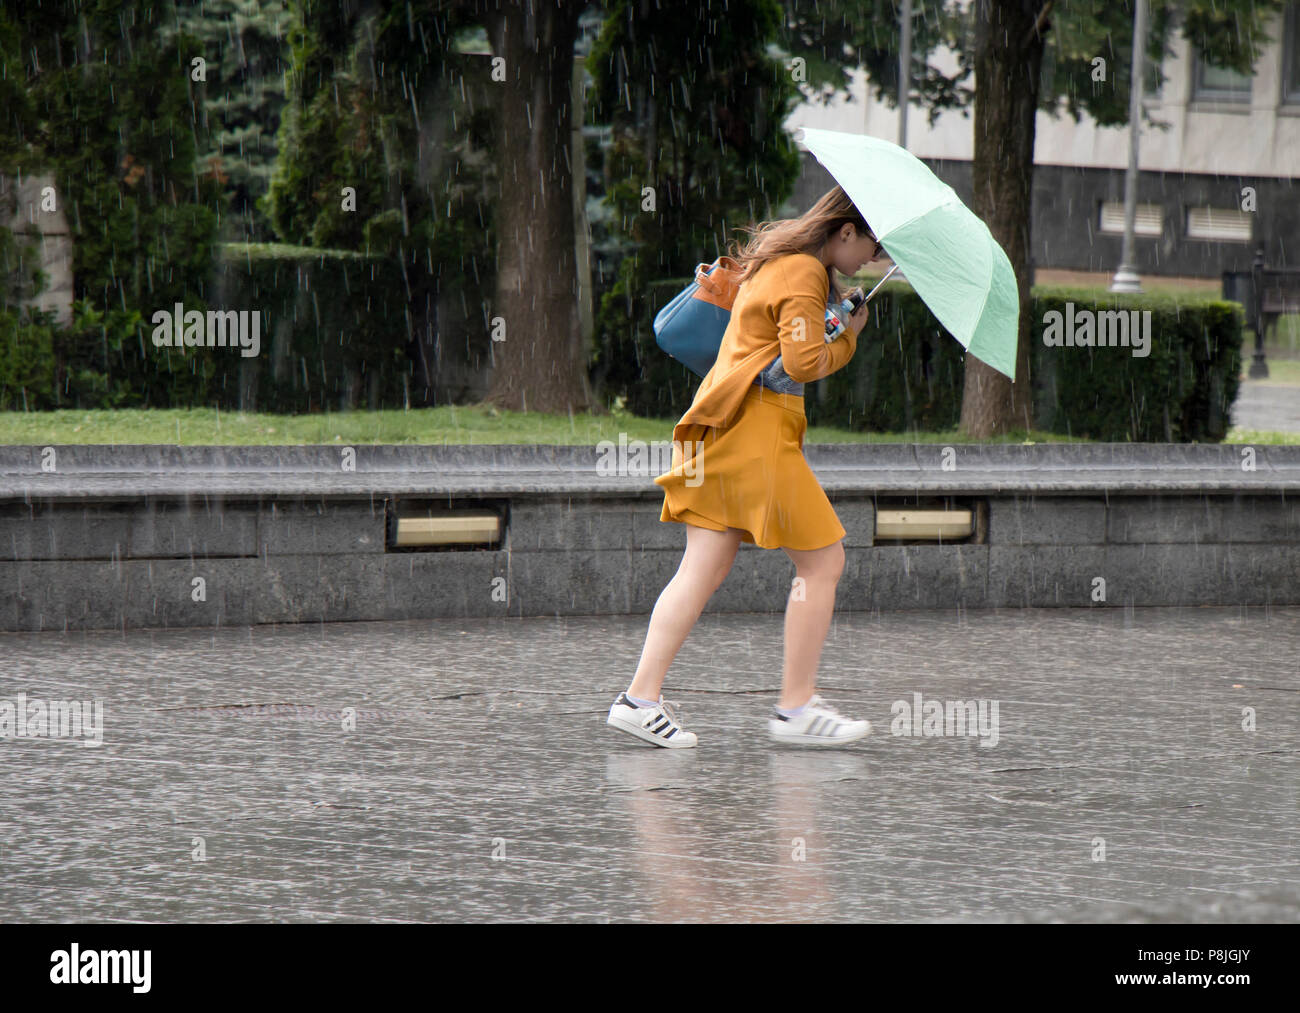 Belgrade, Serbia - June 14, 2018: One young woman running under umbrella in the sudden  heavy and windy  spring rain in the city park , holding a bott Stock Photo